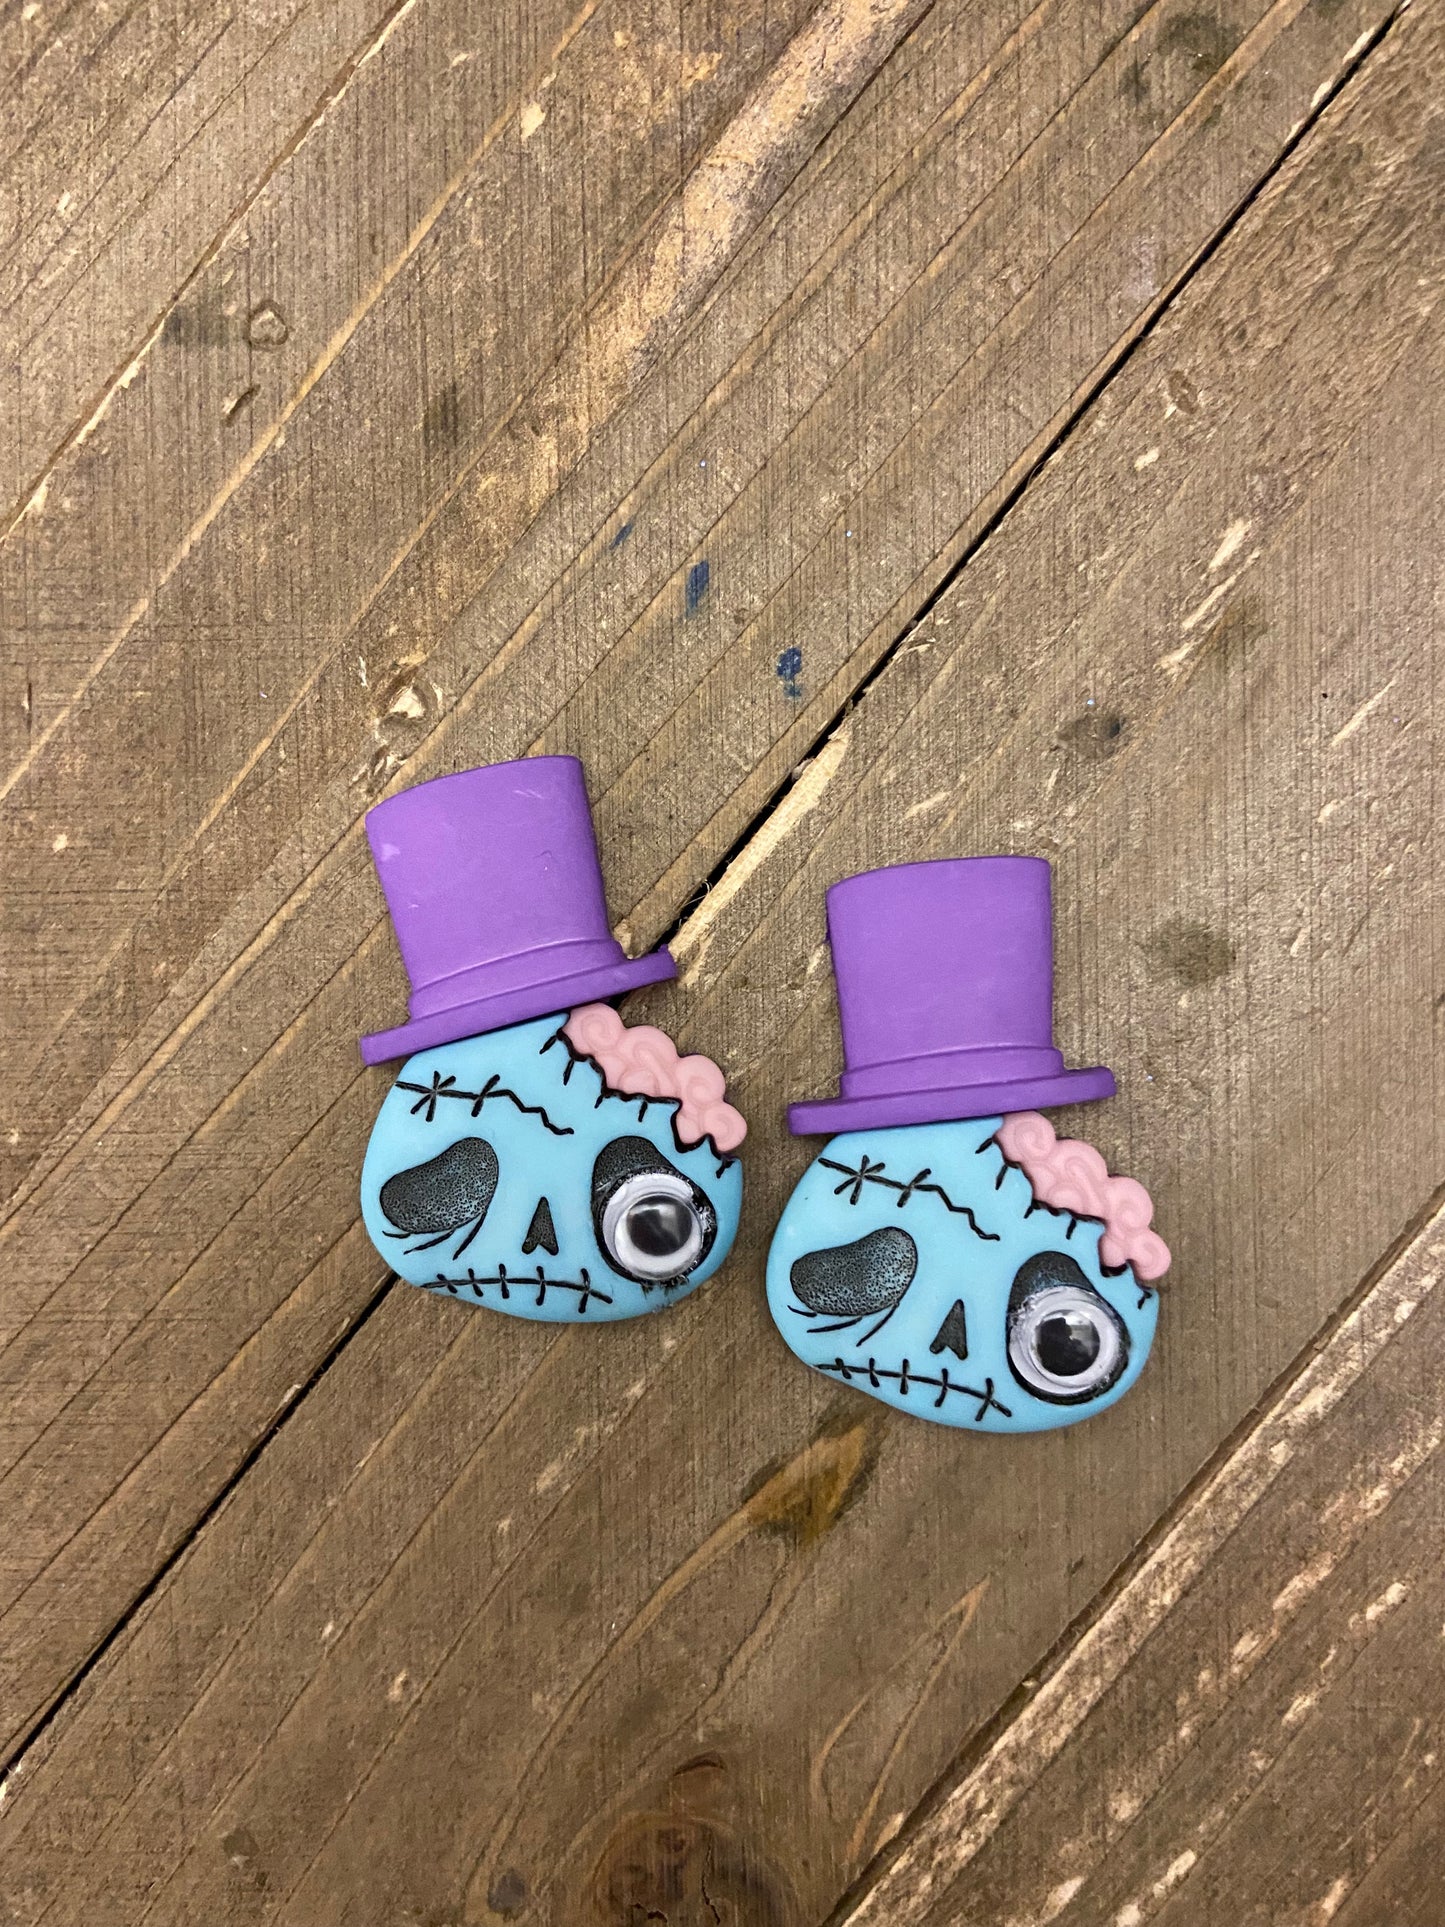 Zaney Zombies Earrings-(4 zombies to choose from)